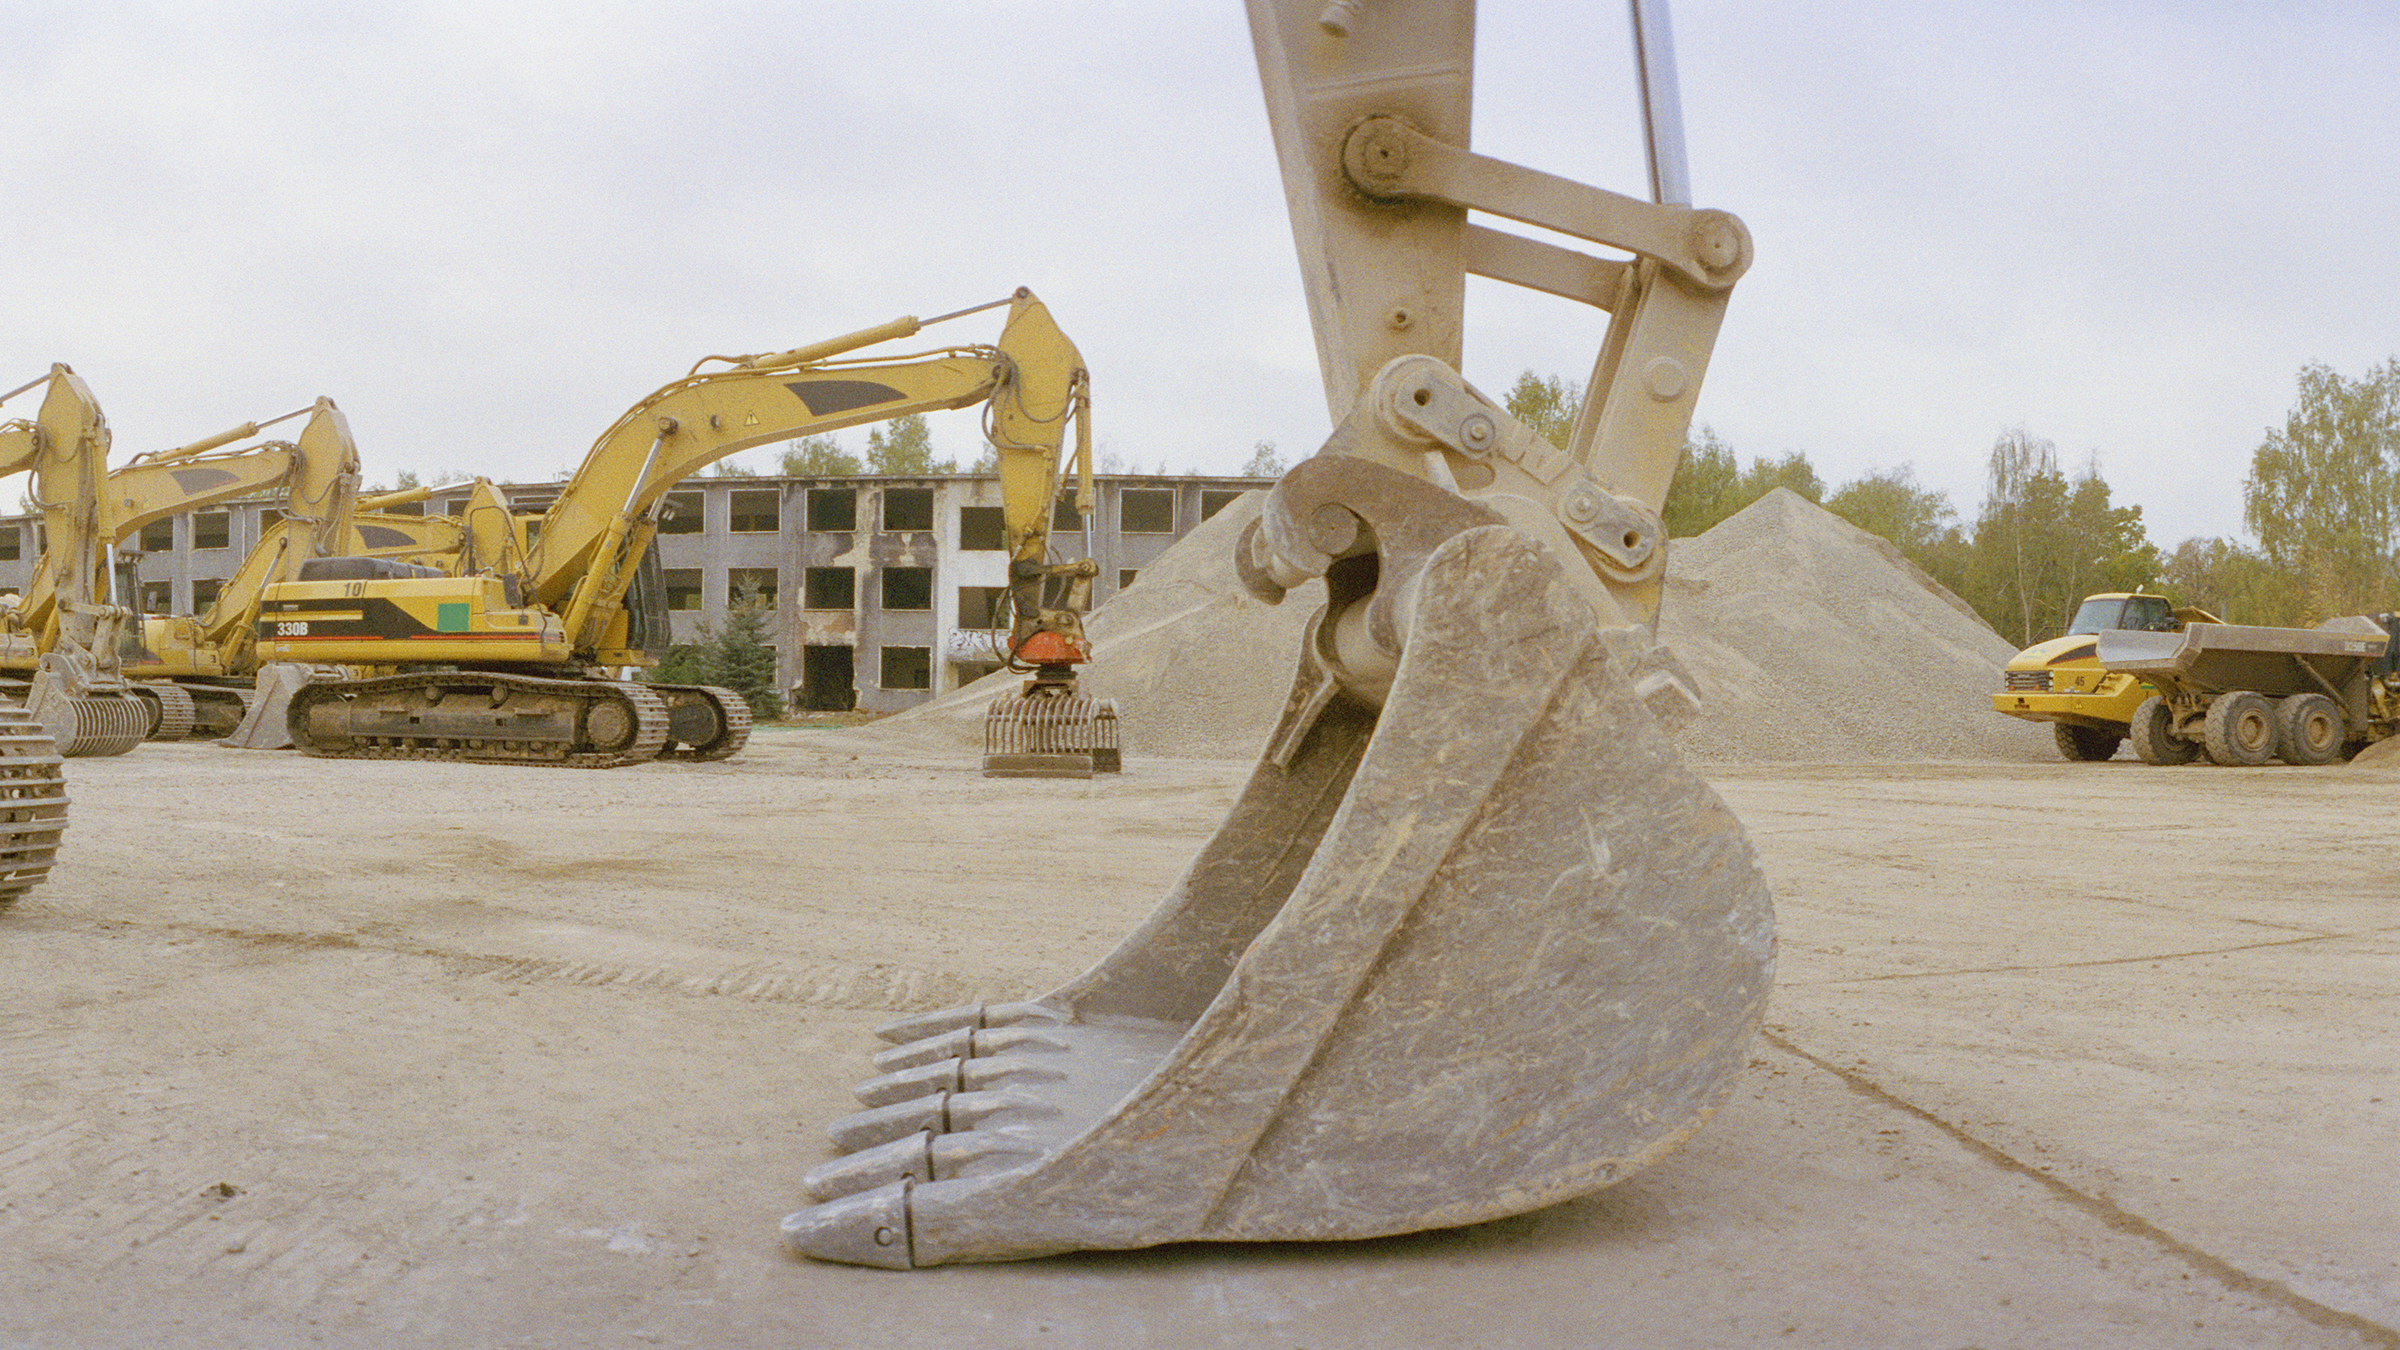 Construction impact: How COVID-19 is silencing the shovels 